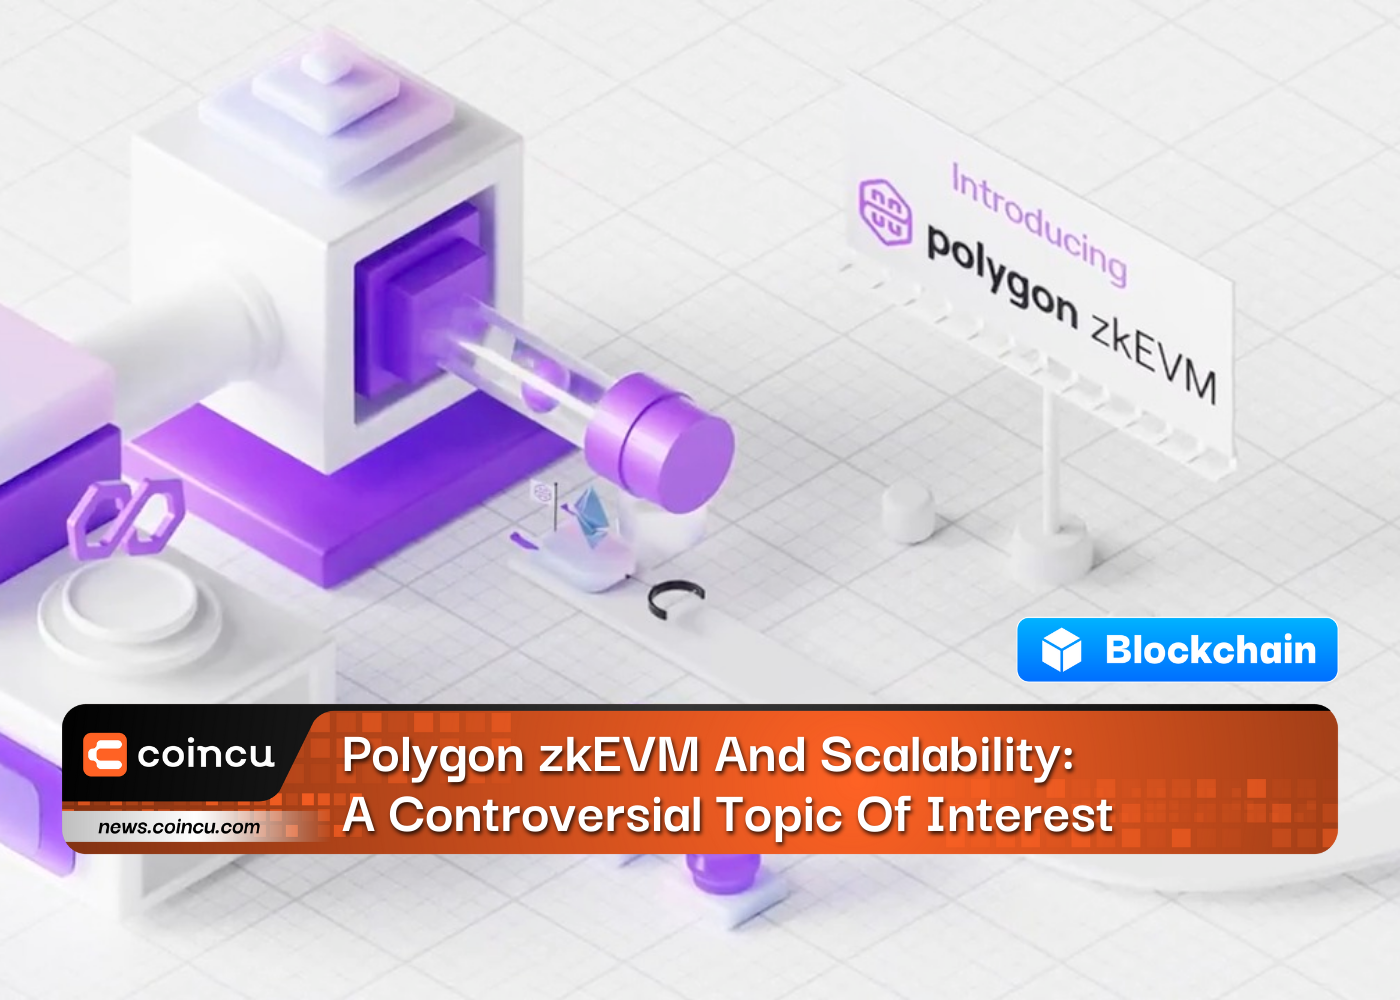 Polygon zkEVM And Scalability: A Controversial Topic Of Interest